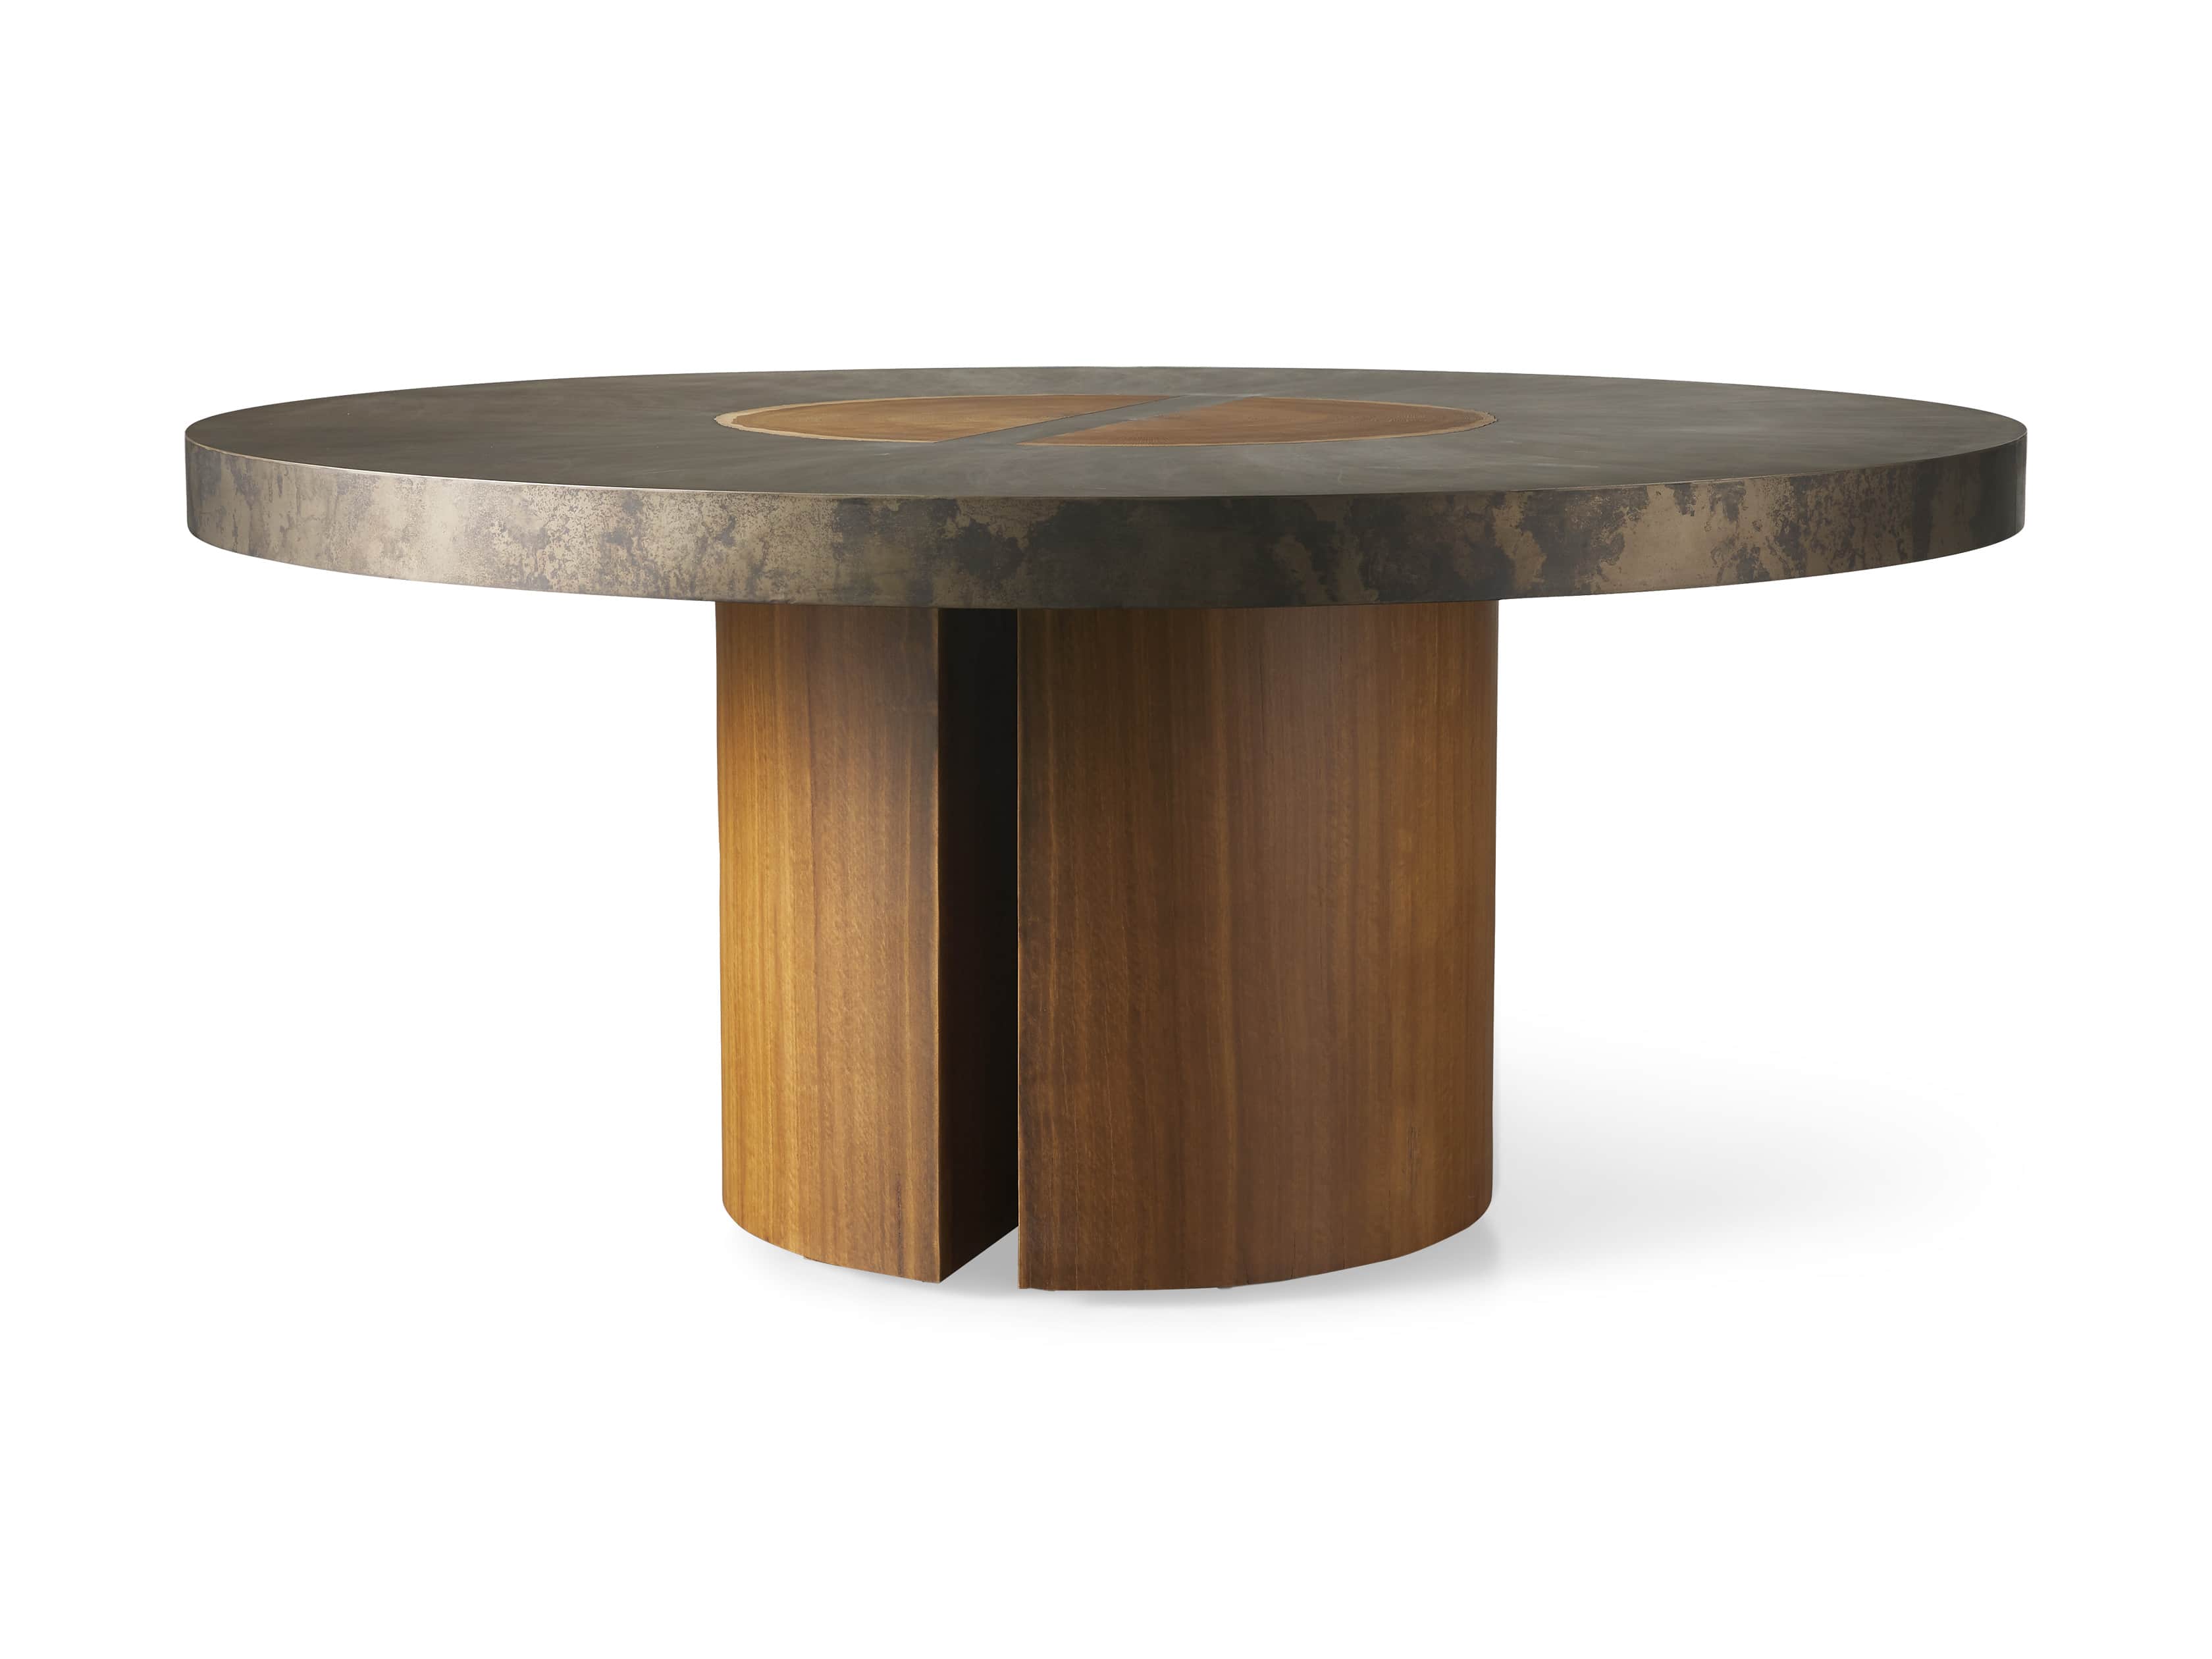 Where To Buy Round Dining Table / 51 Round Dining Tables That Save On